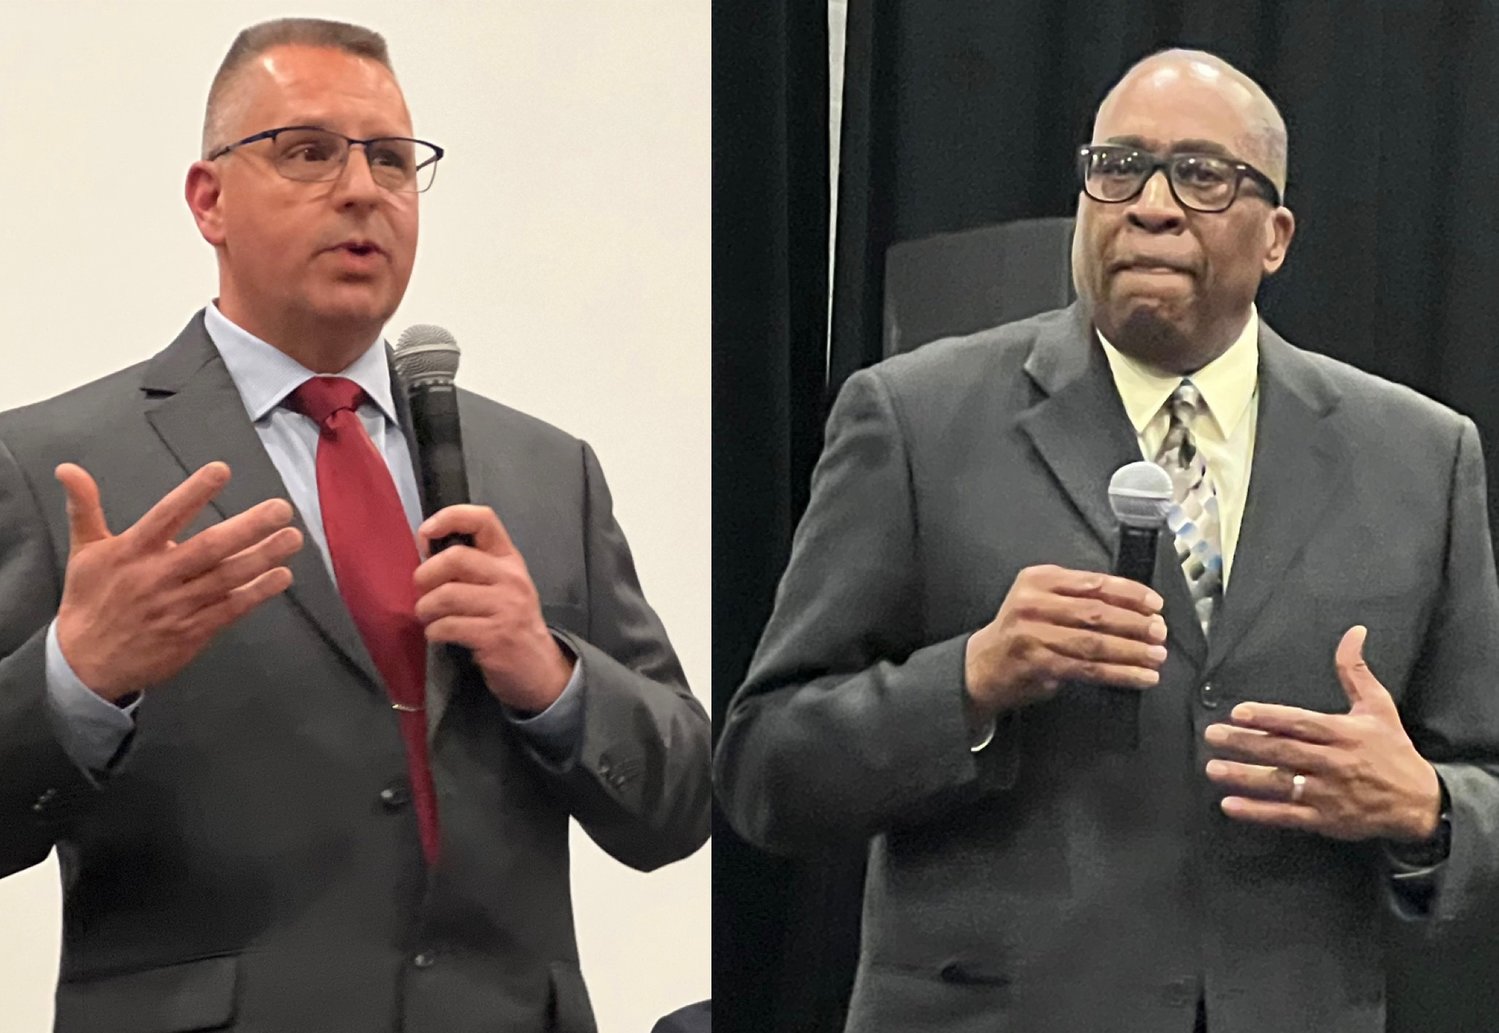 Edwin Miller (left) and Brian Sturdivant (right) spoke at a forum on Tuesday.